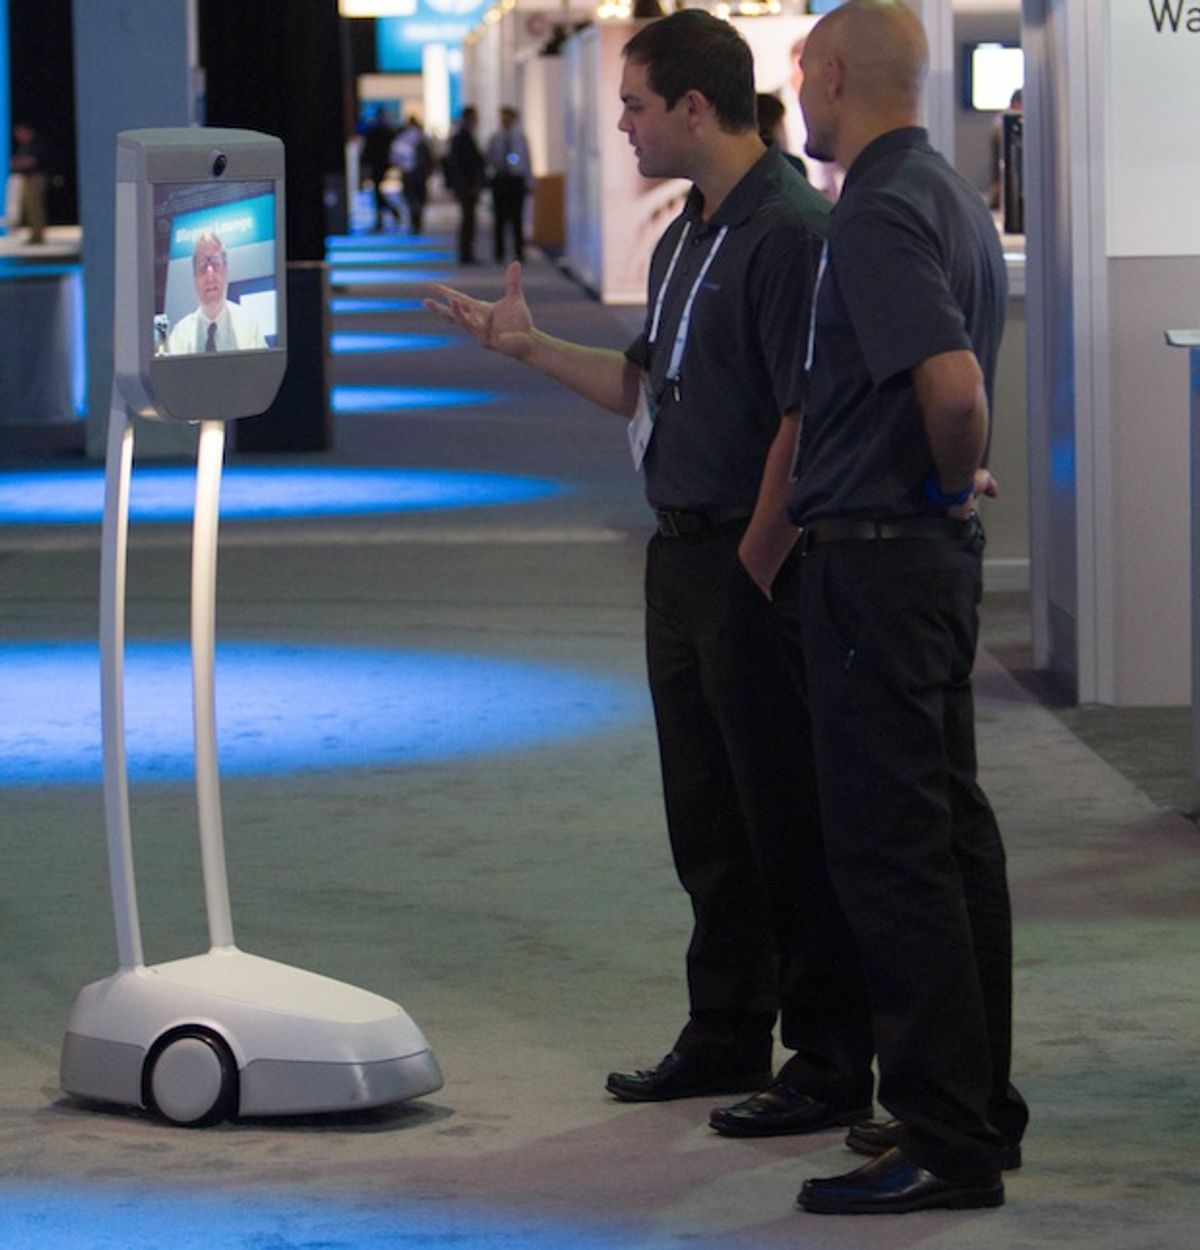 How to Attend Next Week's RoboBusiness Conference as a Robot